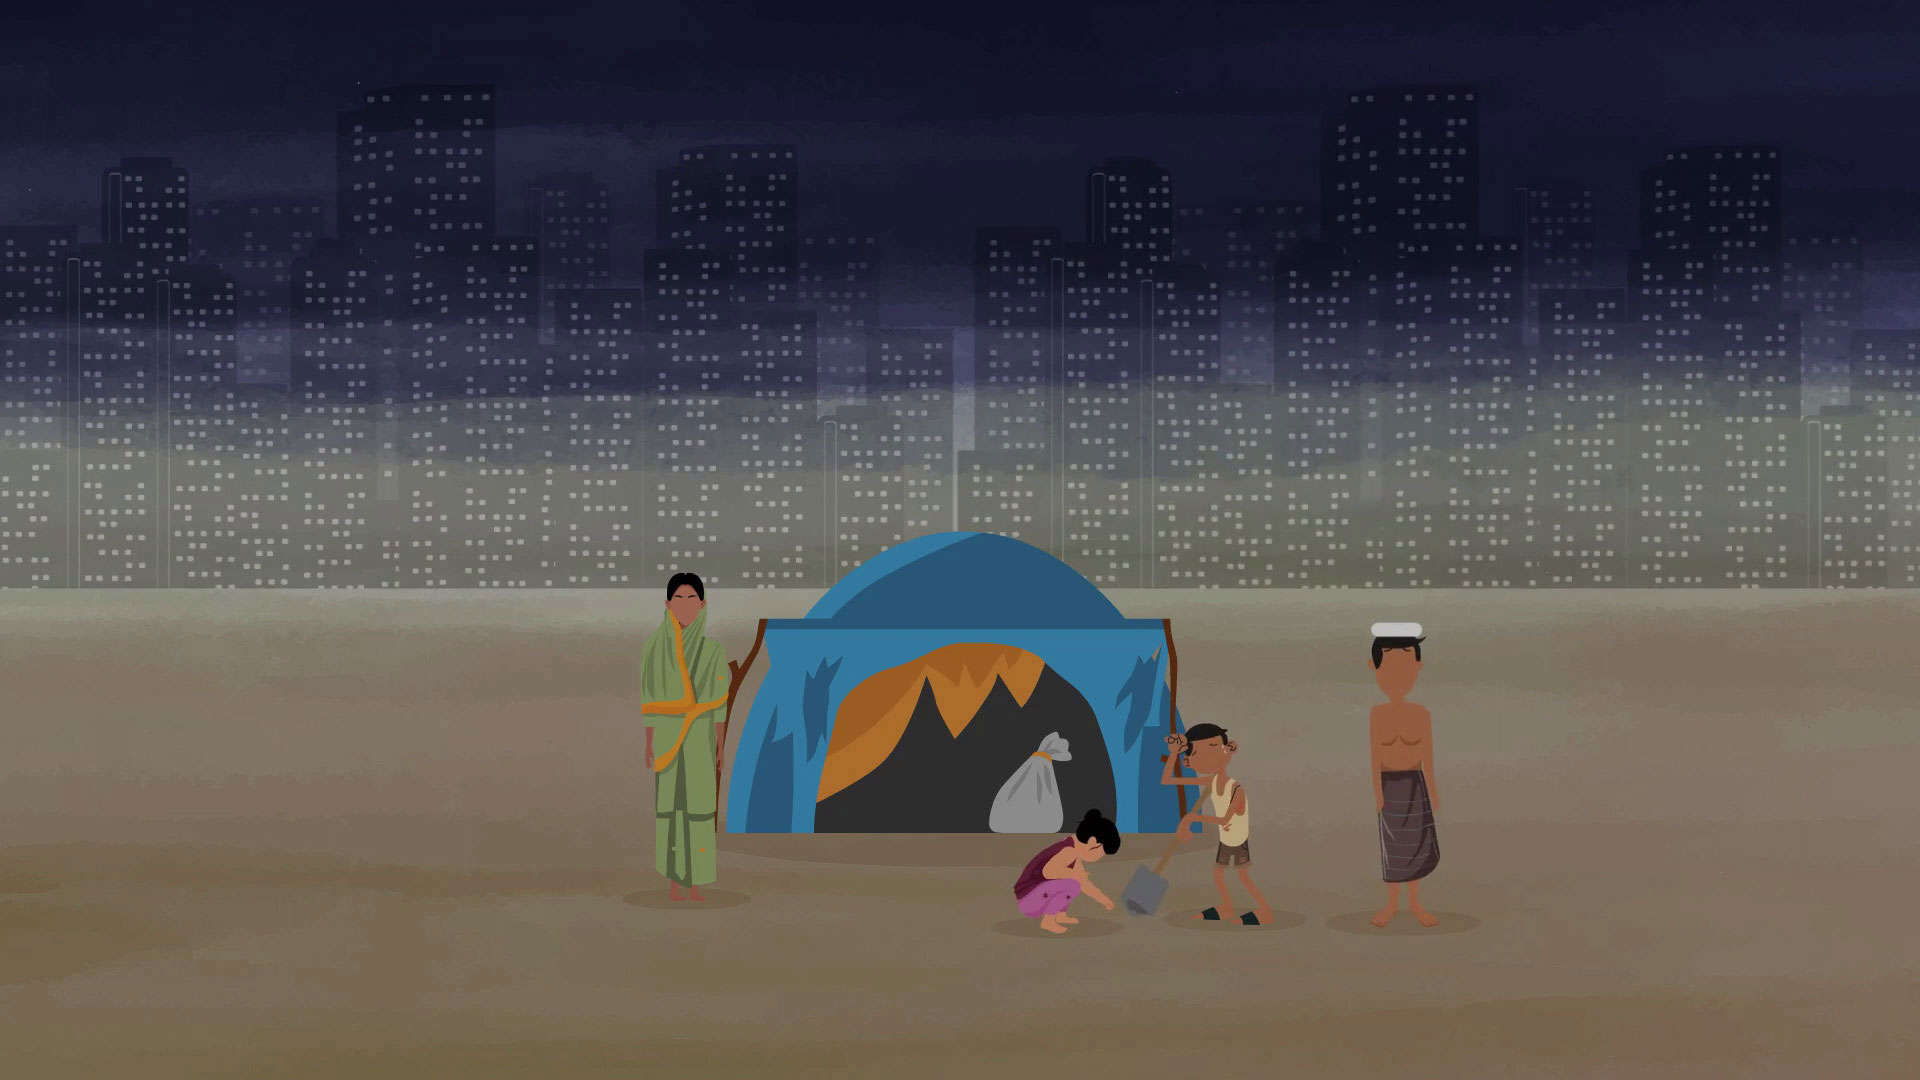 An animated explainer video presenting IJM, featuring a group of people gathered in front of a tent.